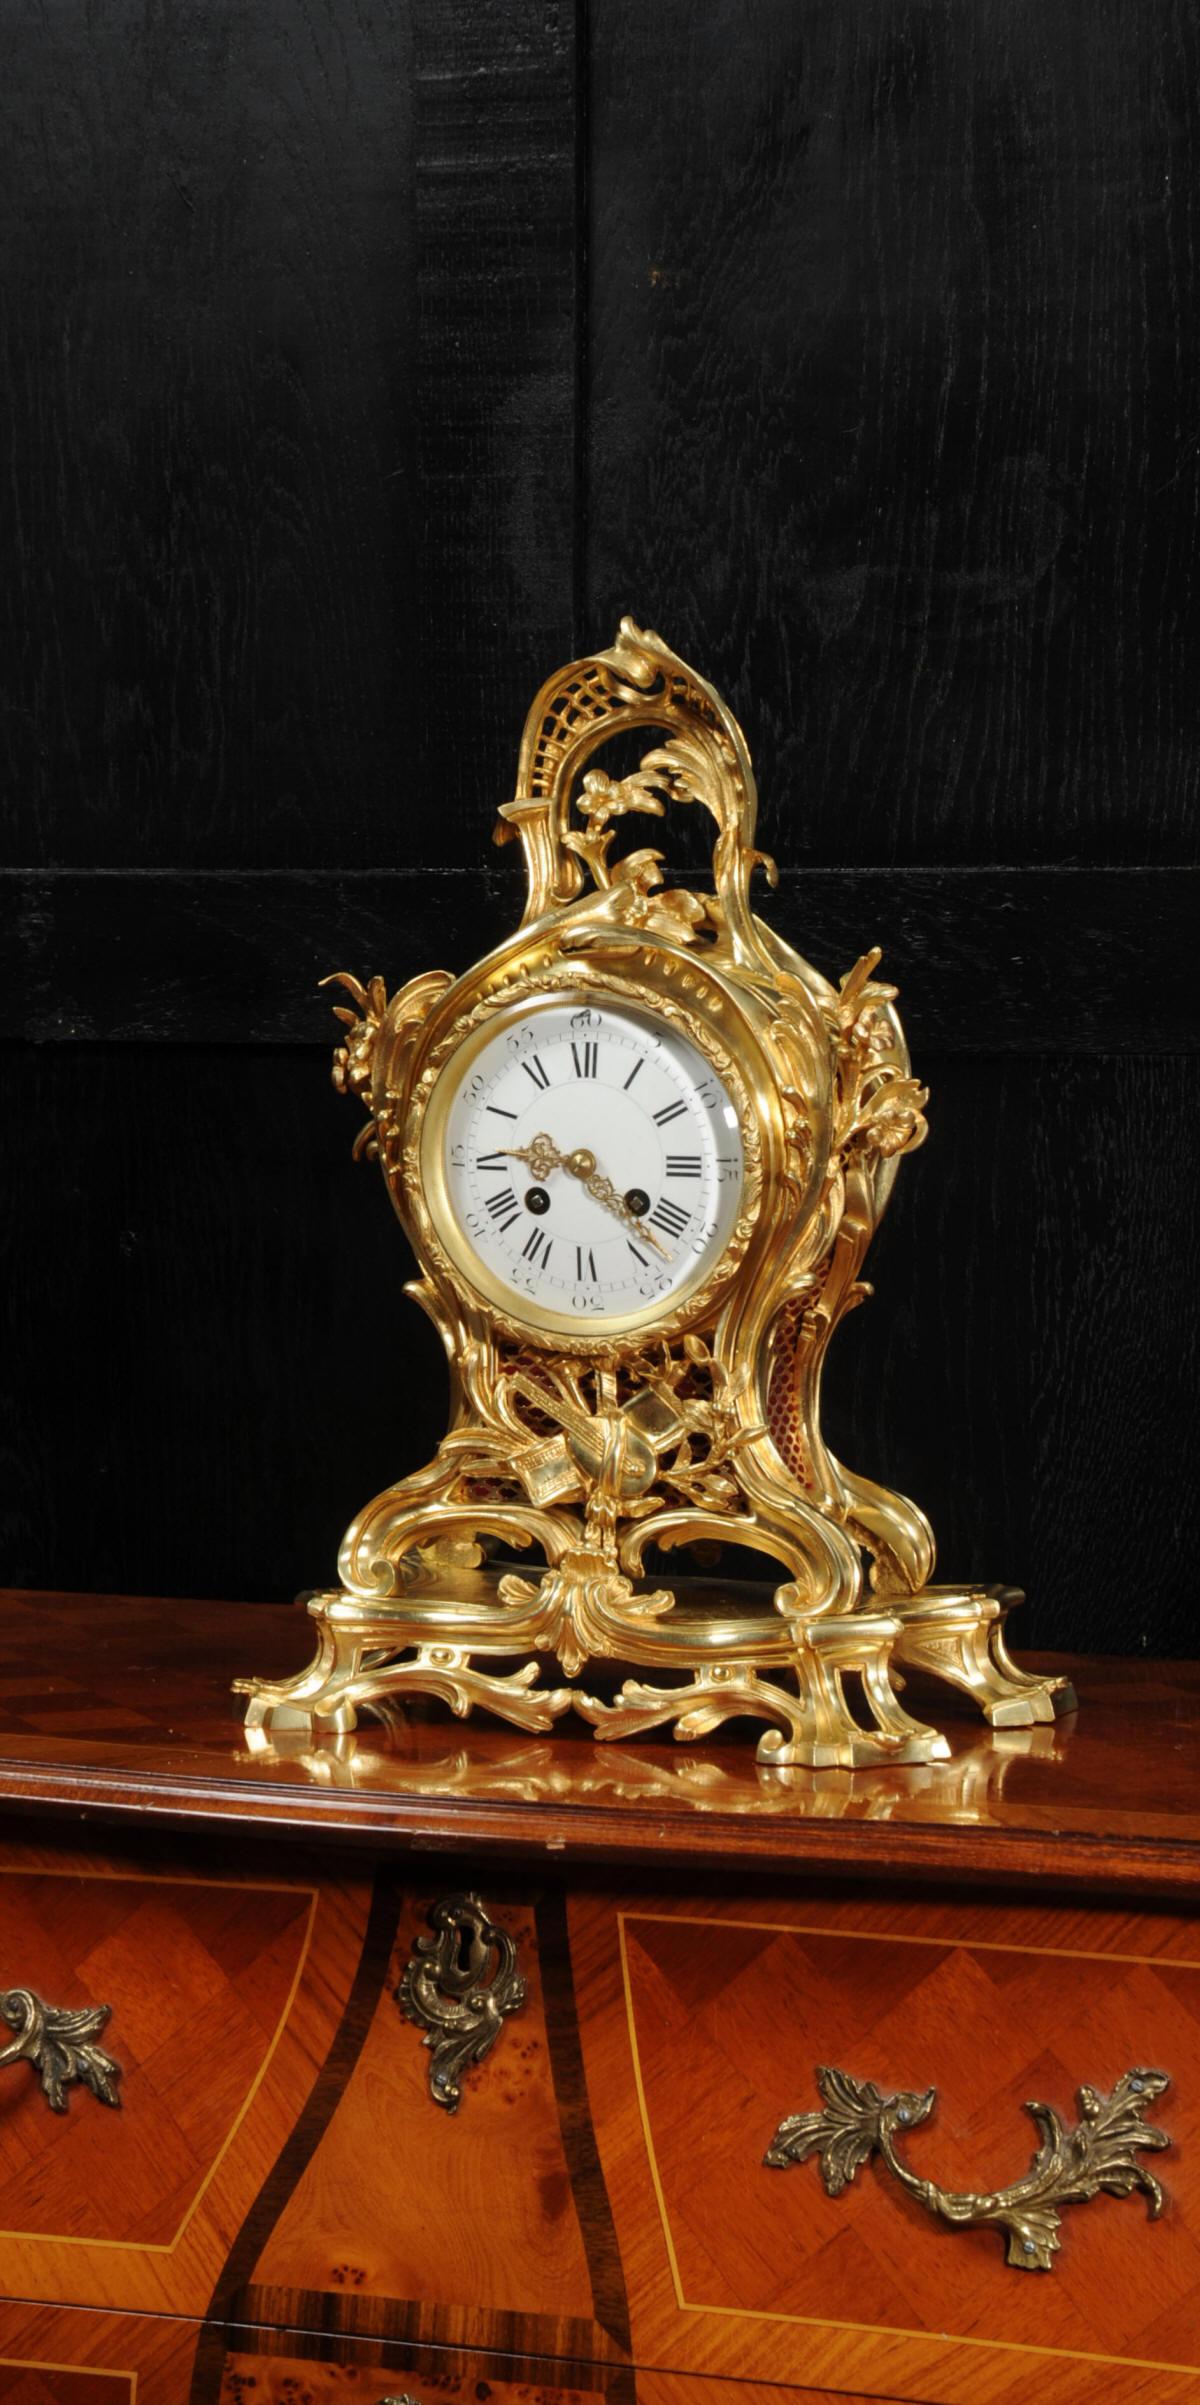 A superb antique French Rococo clock, circa 1880, beautifully modelled and finished in ormolu (finely gilded bronze or doré bronze). Louis XV in style, formed of elegant curves and counter curves, decorated with a trellis and floral swags. Below the